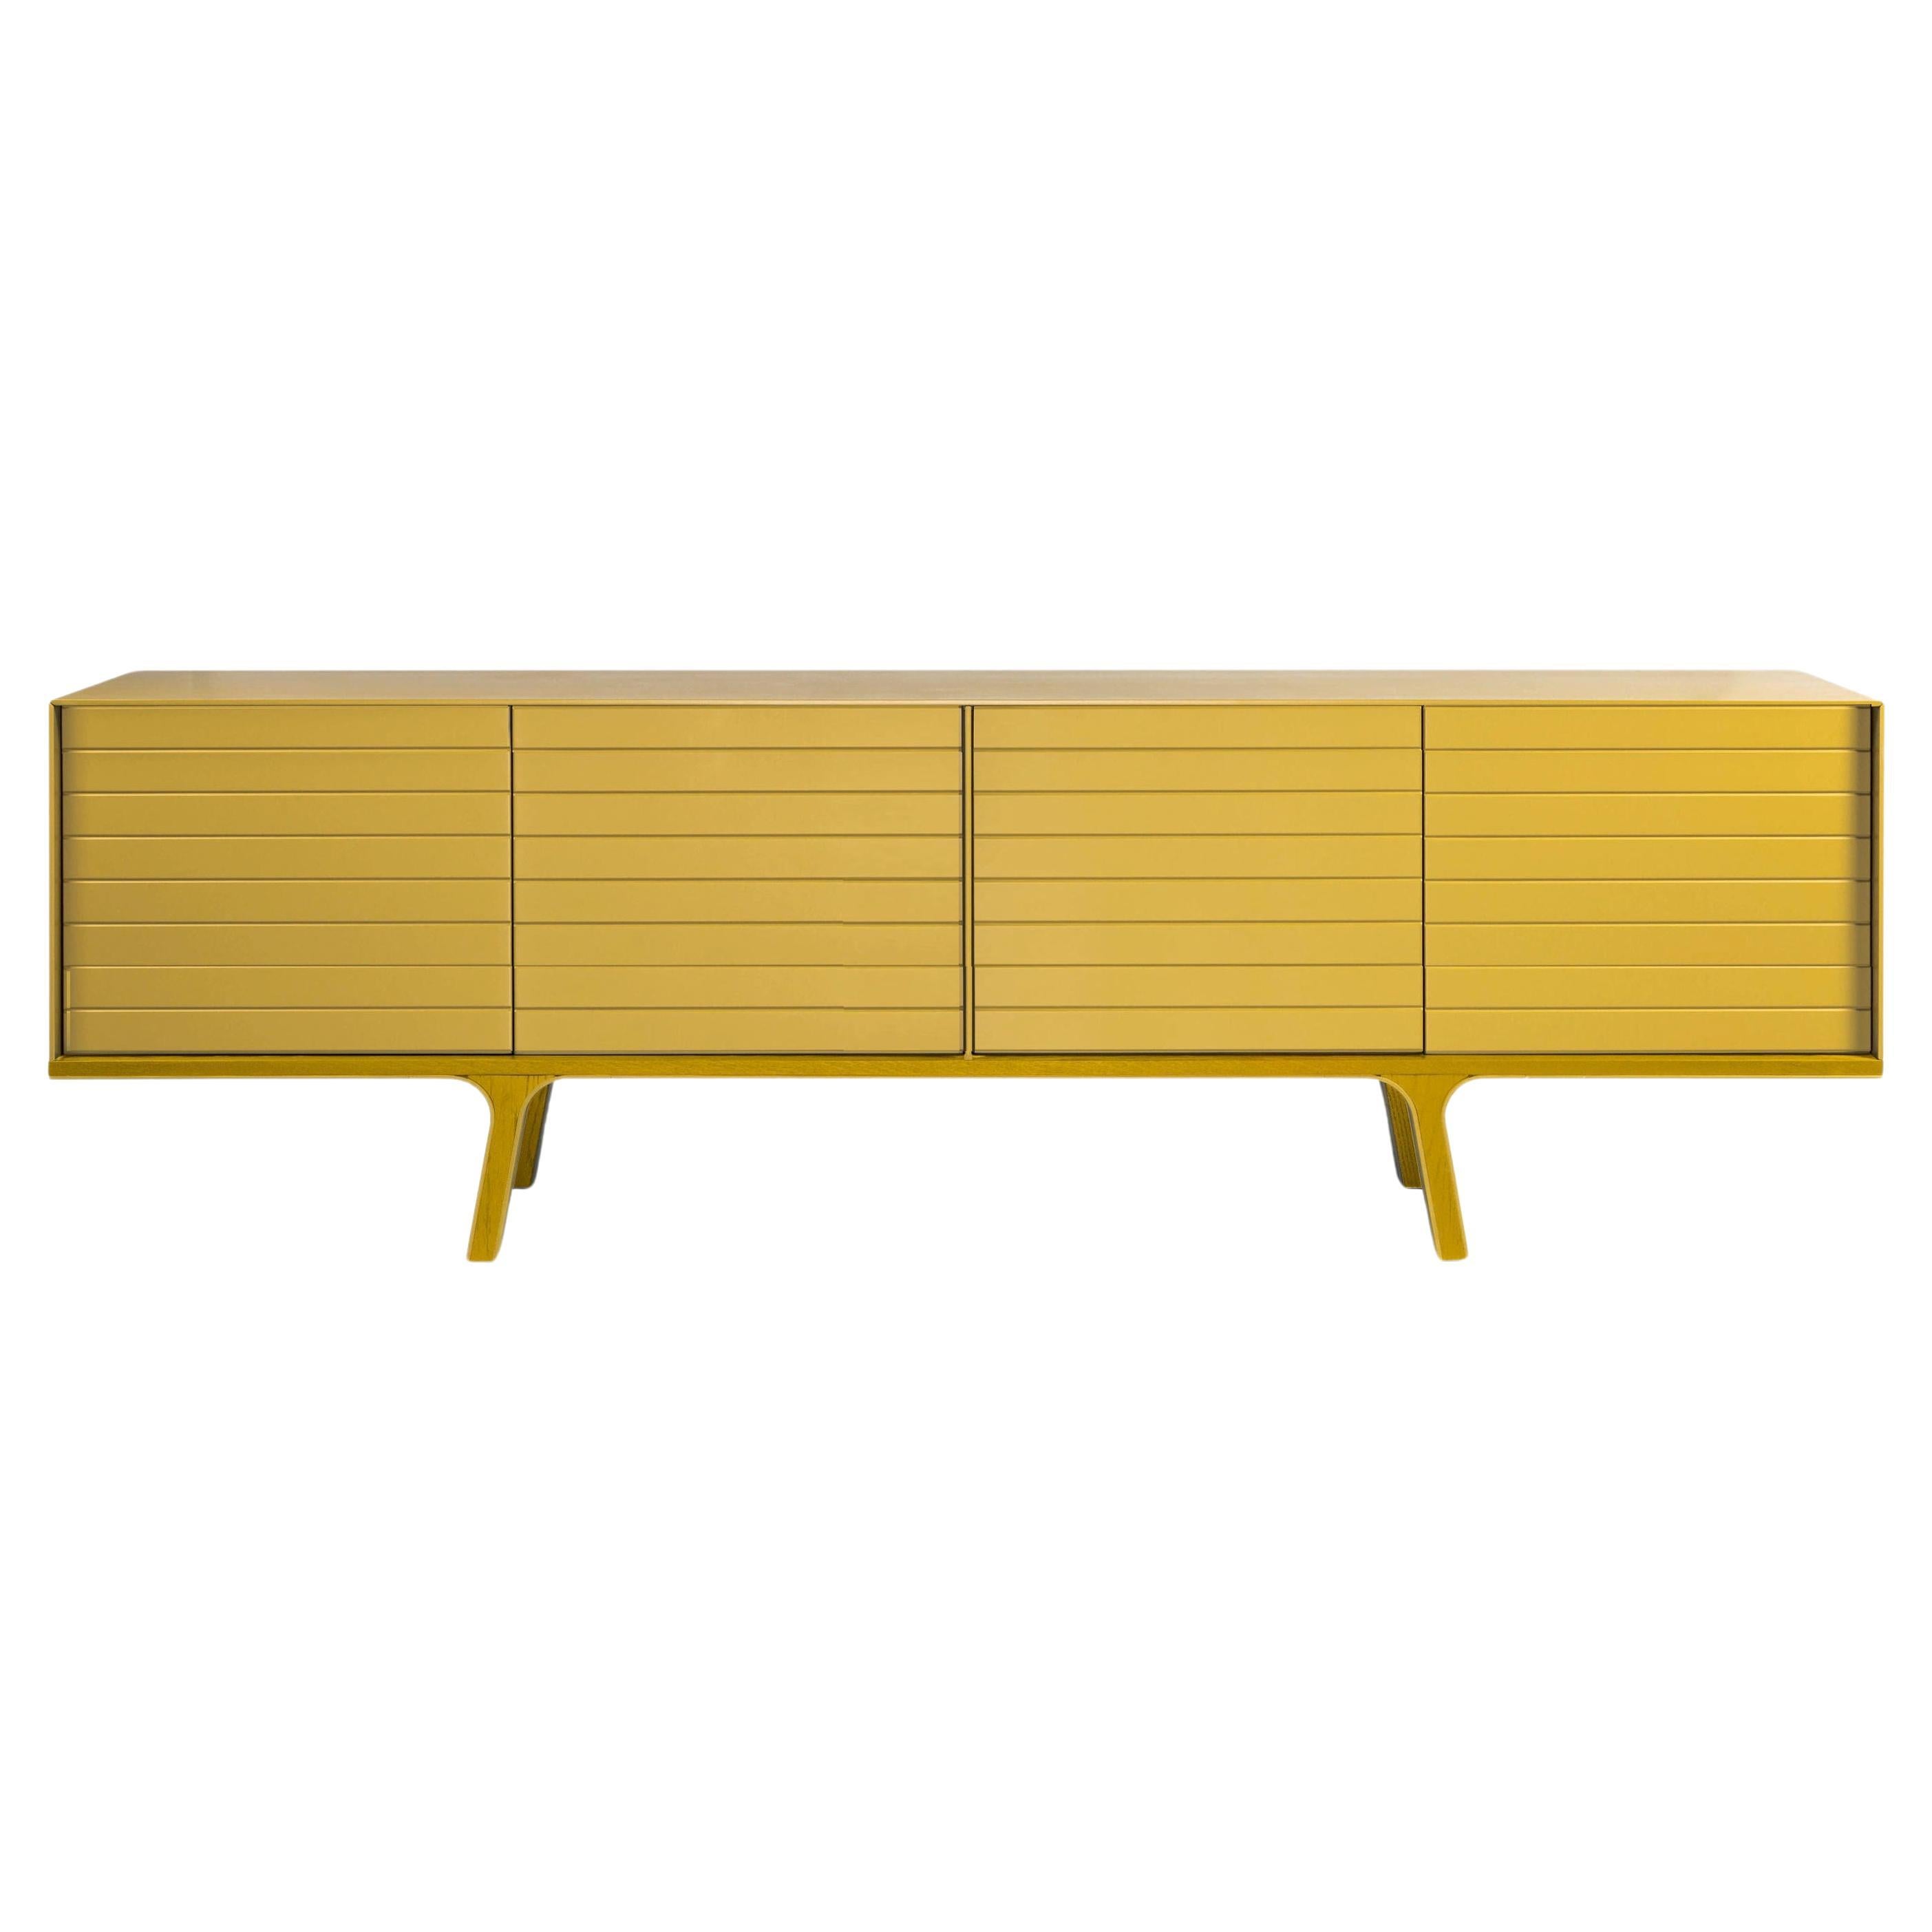 Customizable Designer Sideboard In Gold Yellow Lacquer